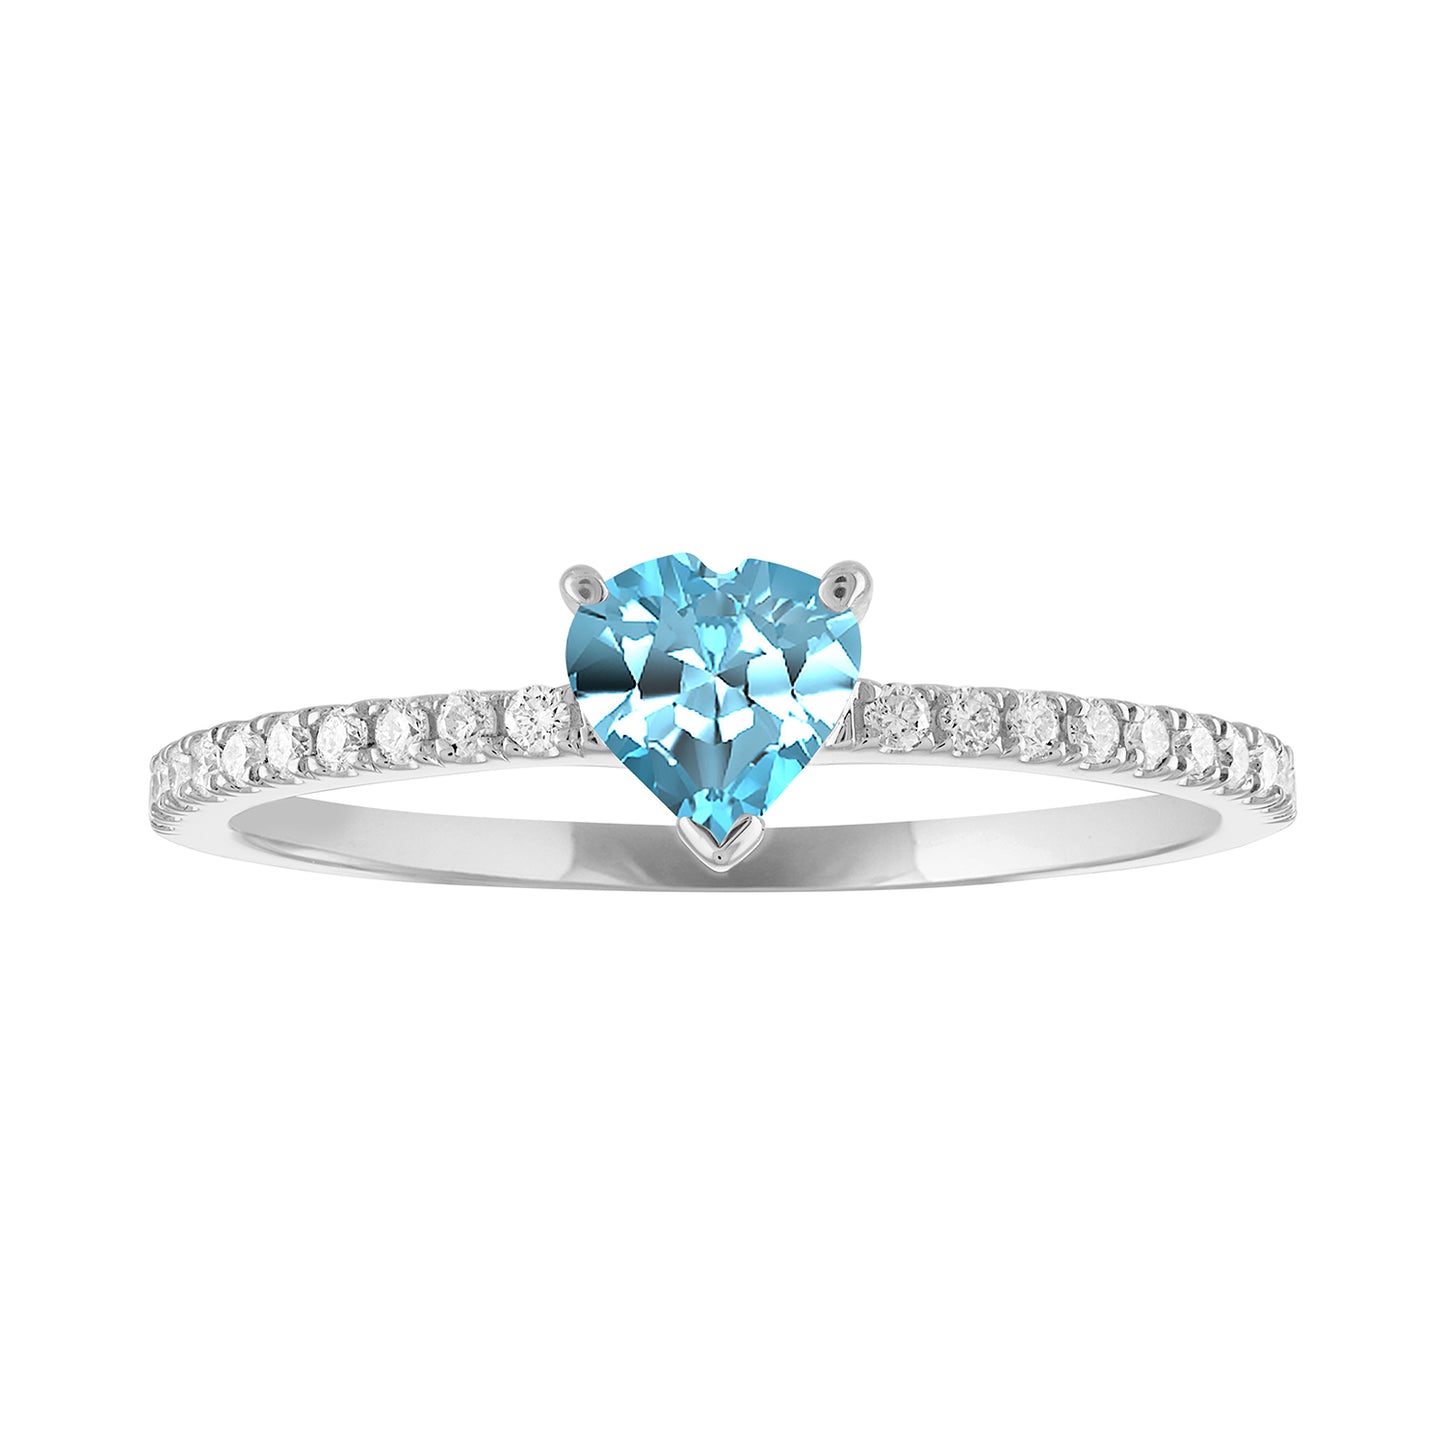 Thin banned white gold ring with heart shaped blue topaz and round diamonds on the shank